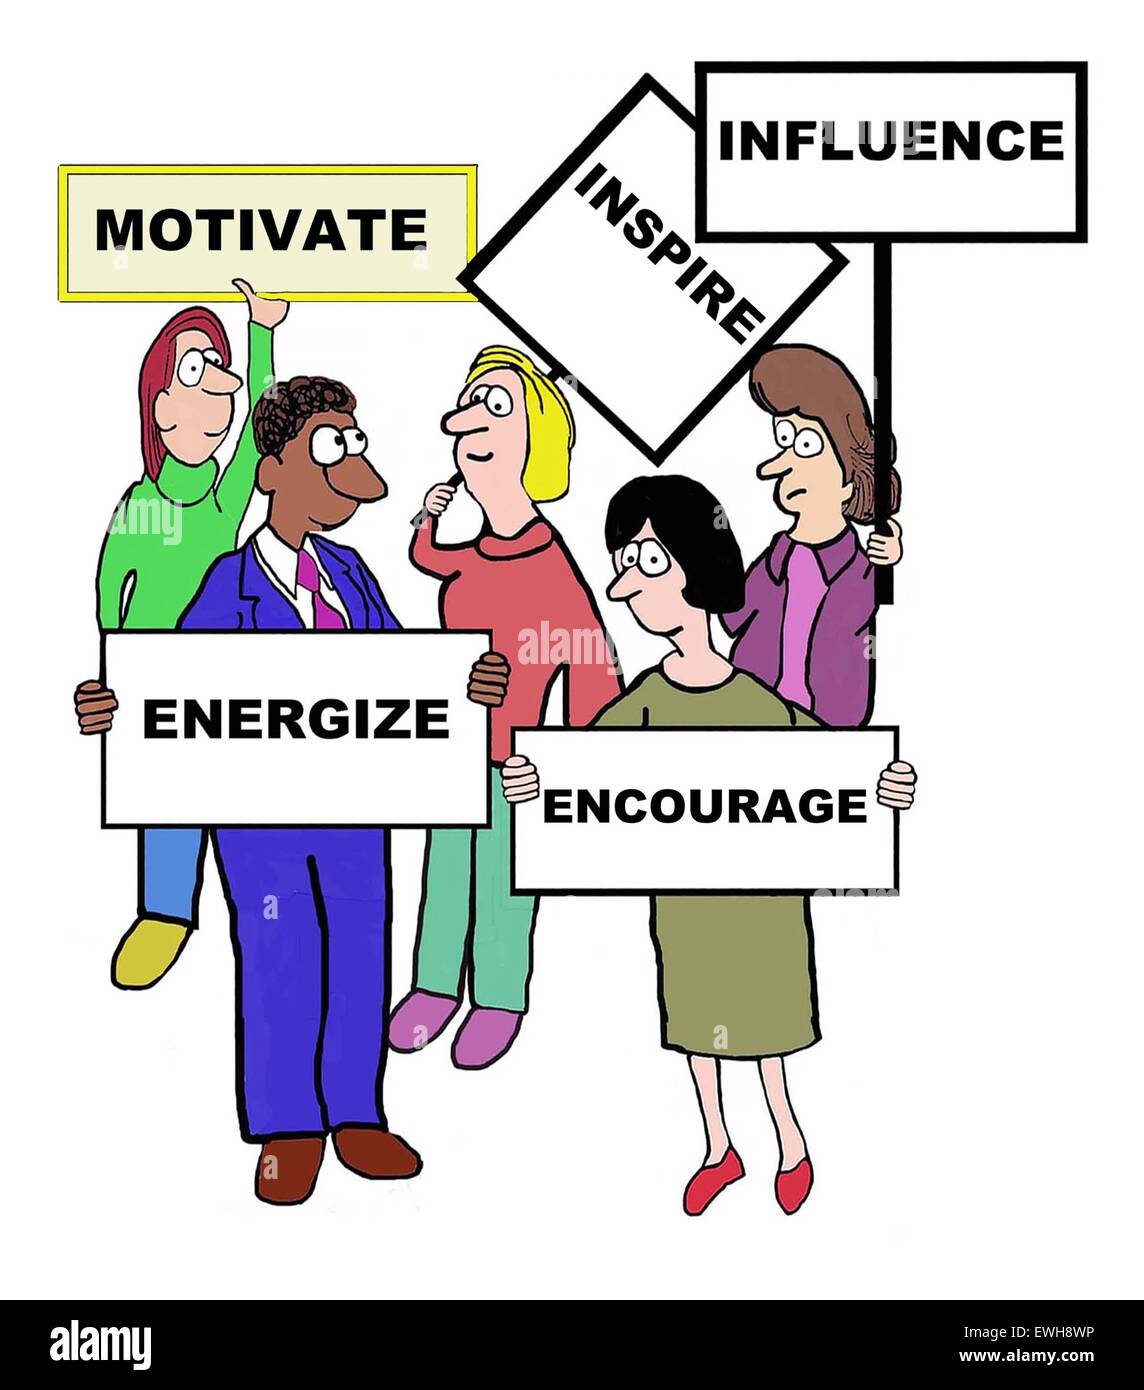 Business cartoon of businesspeople holding signs on 'motivate: inspire, influence, energize, encourage'. Stock Photo